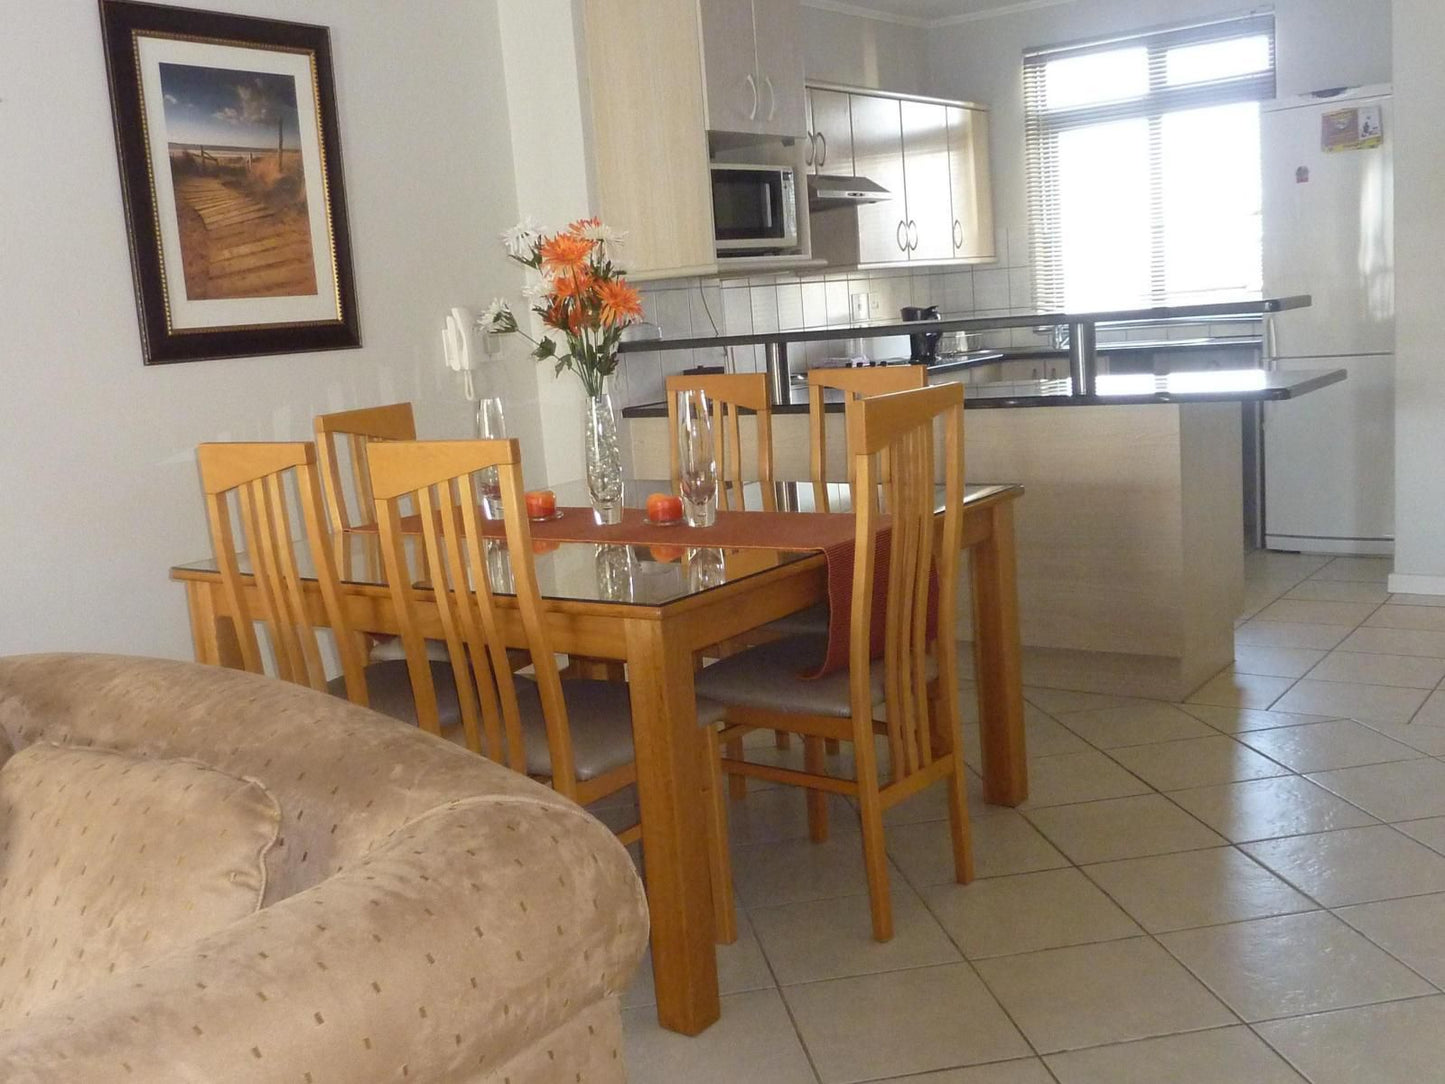 Majorca Self Catering Apartments Century City Cape Town Western Cape South Africa Living Room